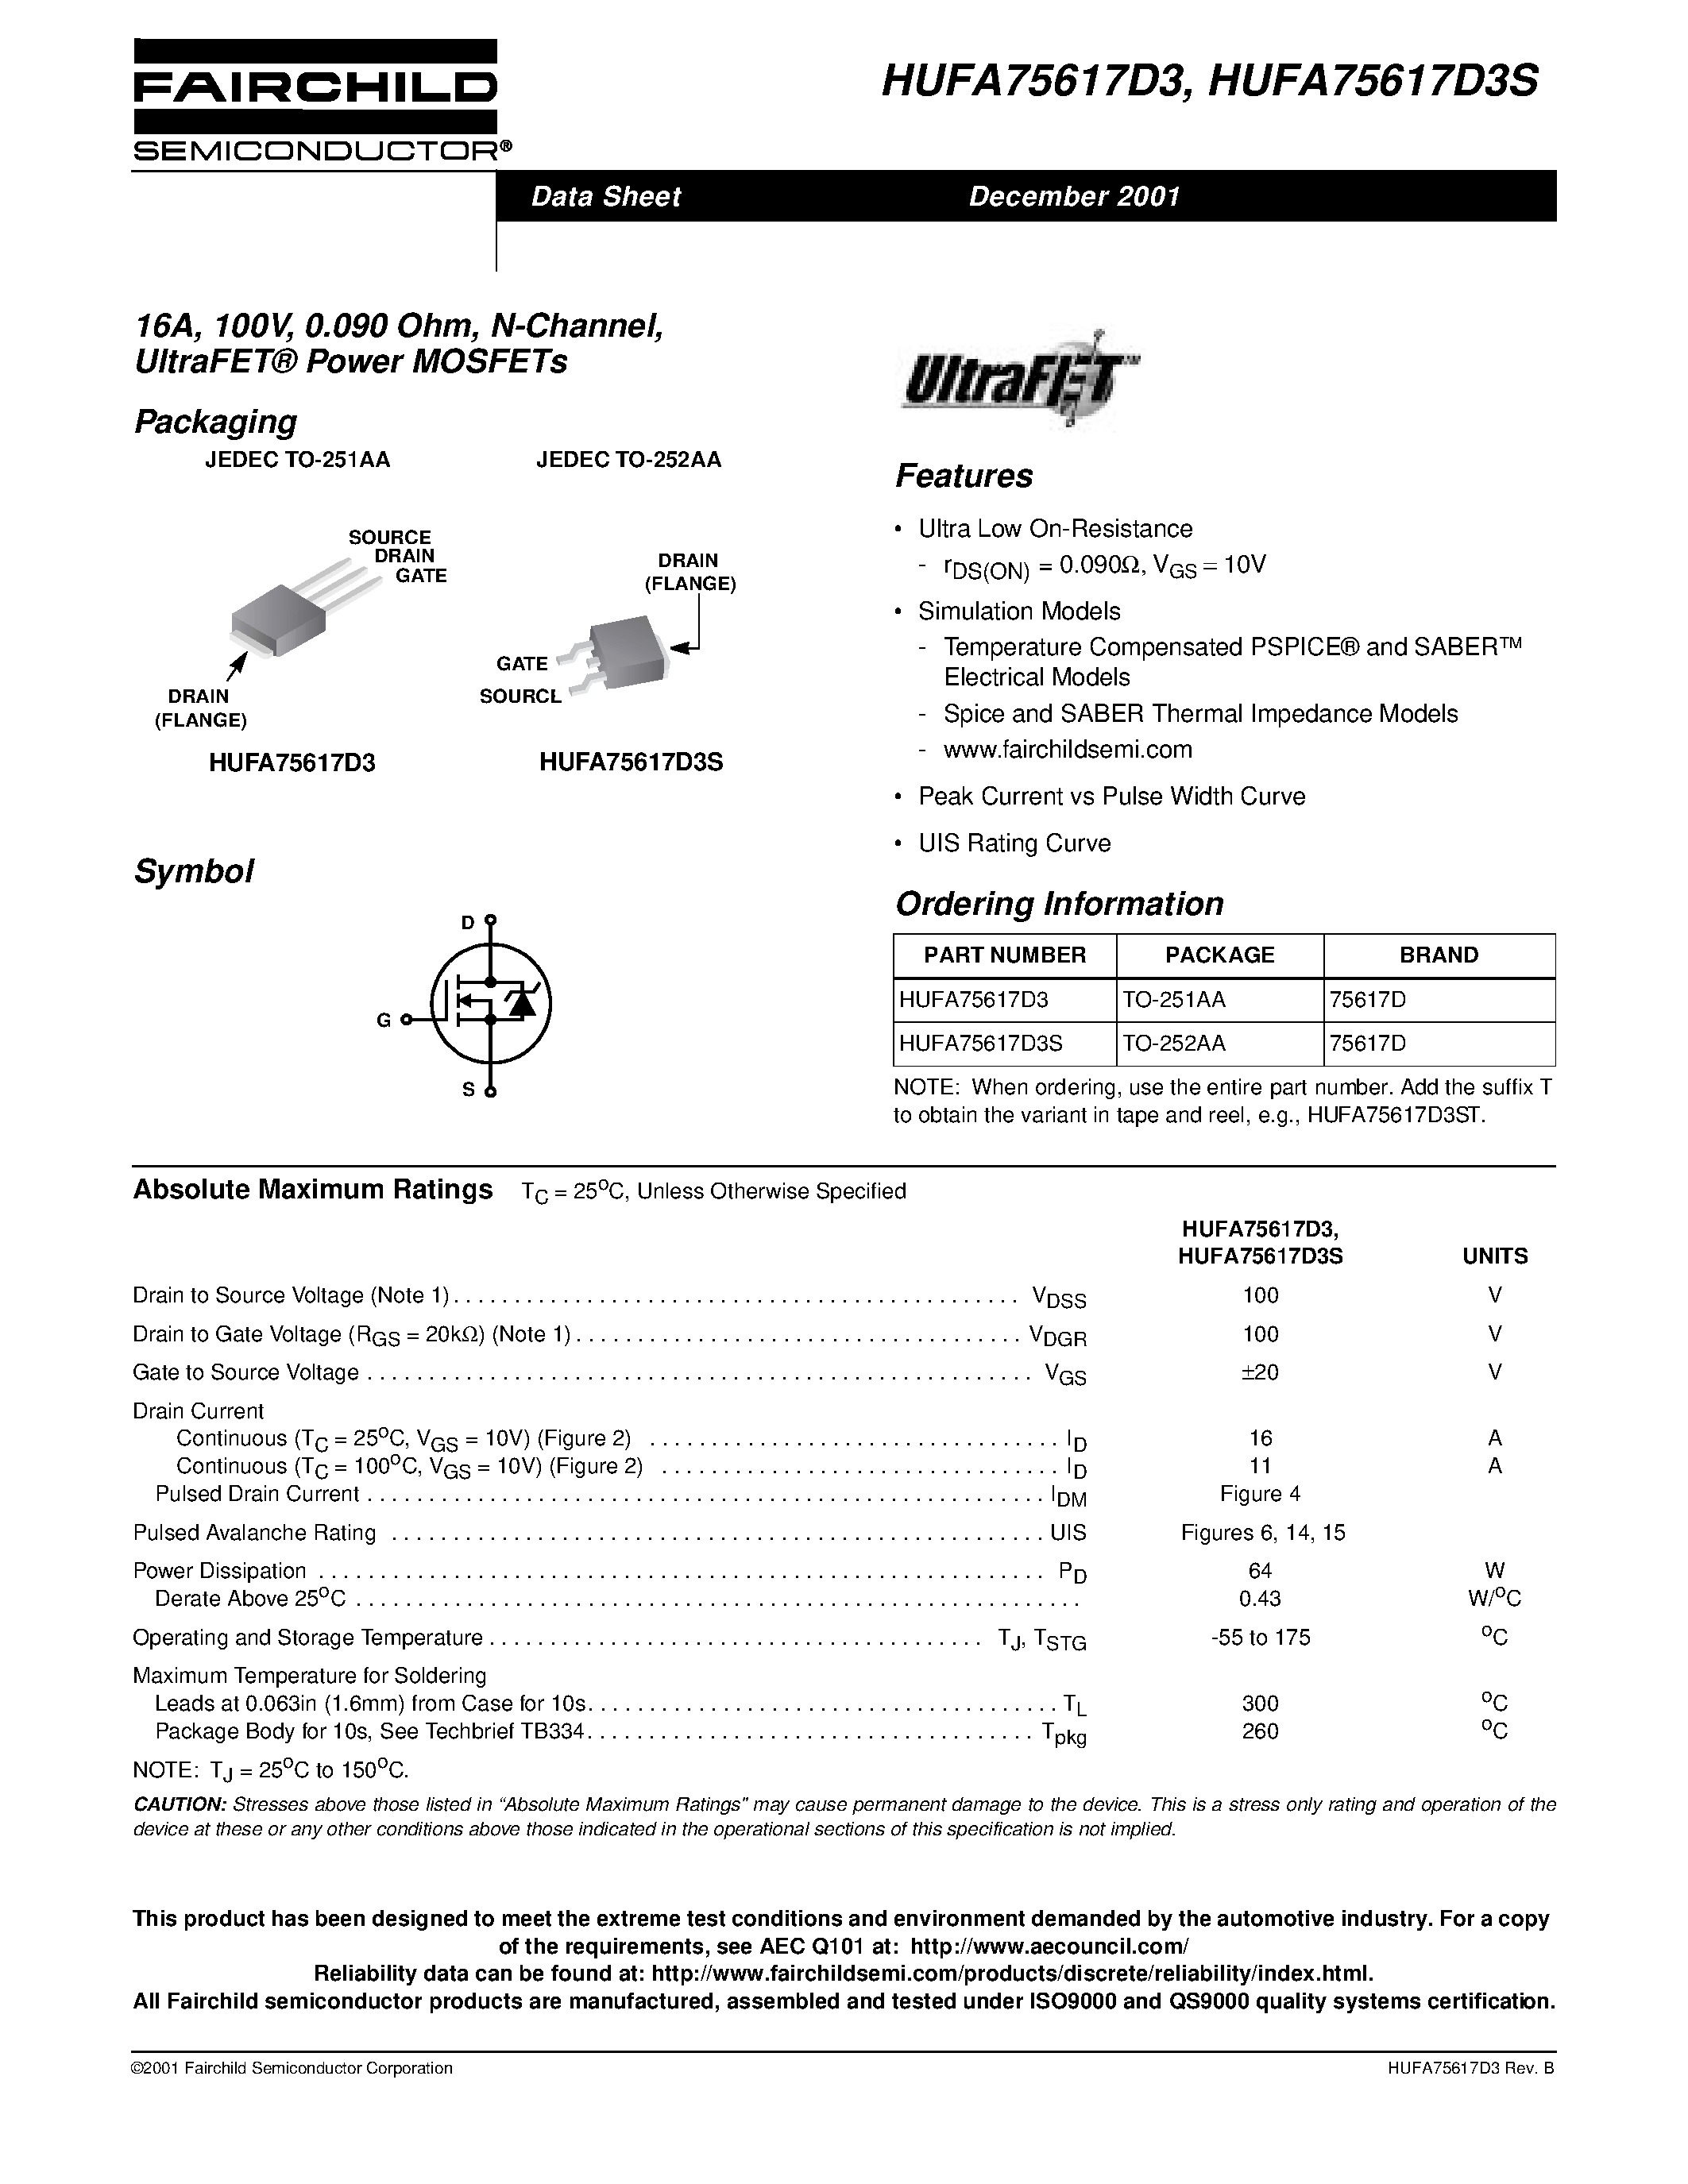 Datasheet HUFA75617D3 - 16A/ 100V/ 0.090 Ohm/ N-Channel/ UltraFET Power MOSFETs page 1